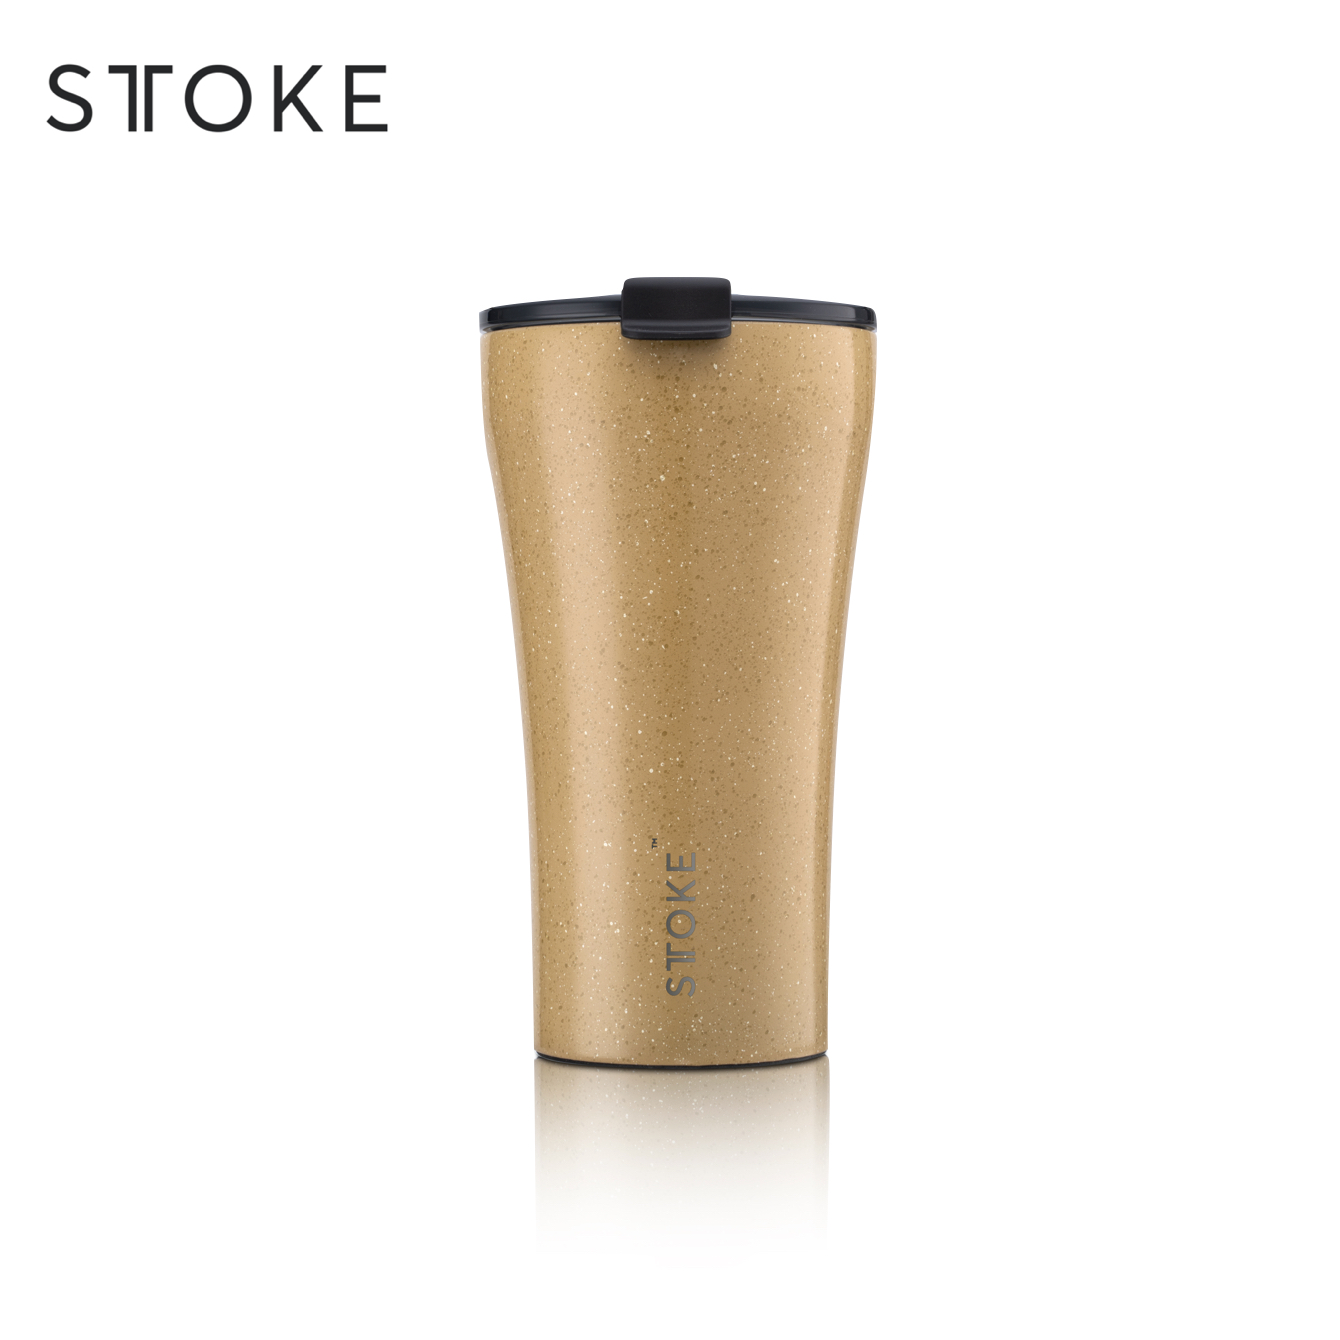 Sttoke Leakproof Ceramic Cup 12 oz - Yellow Stone